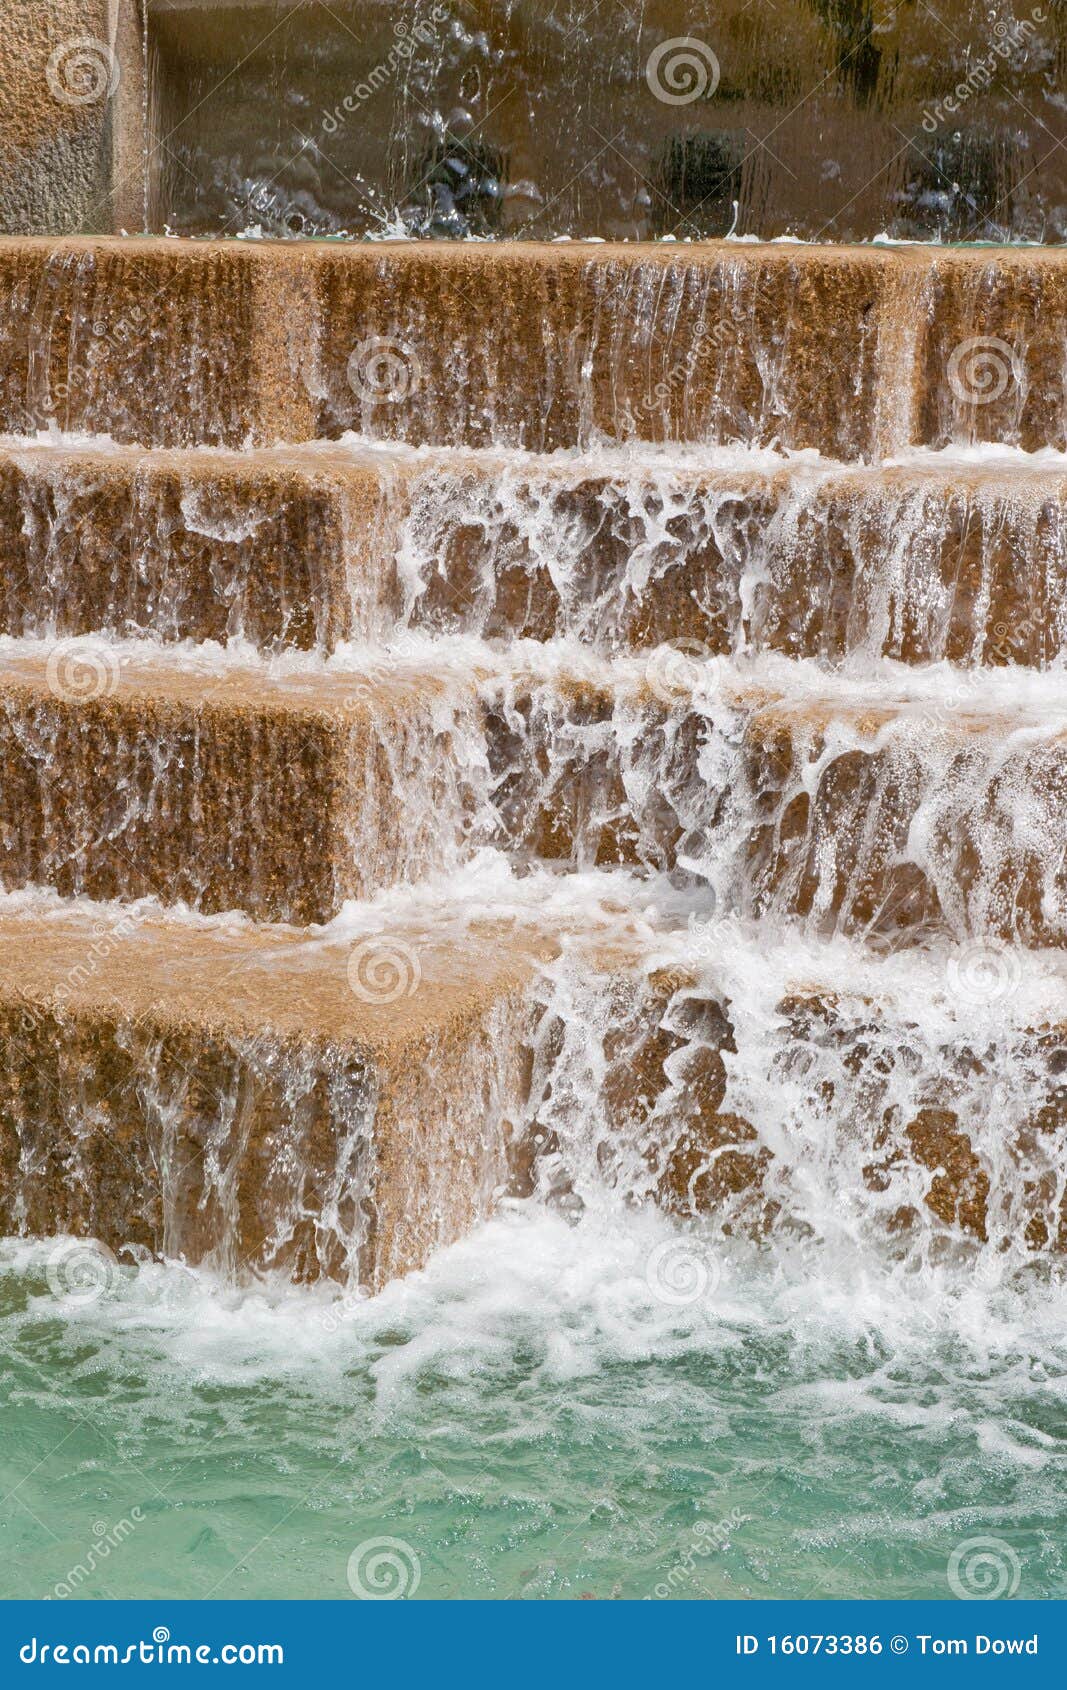 waterfall feature